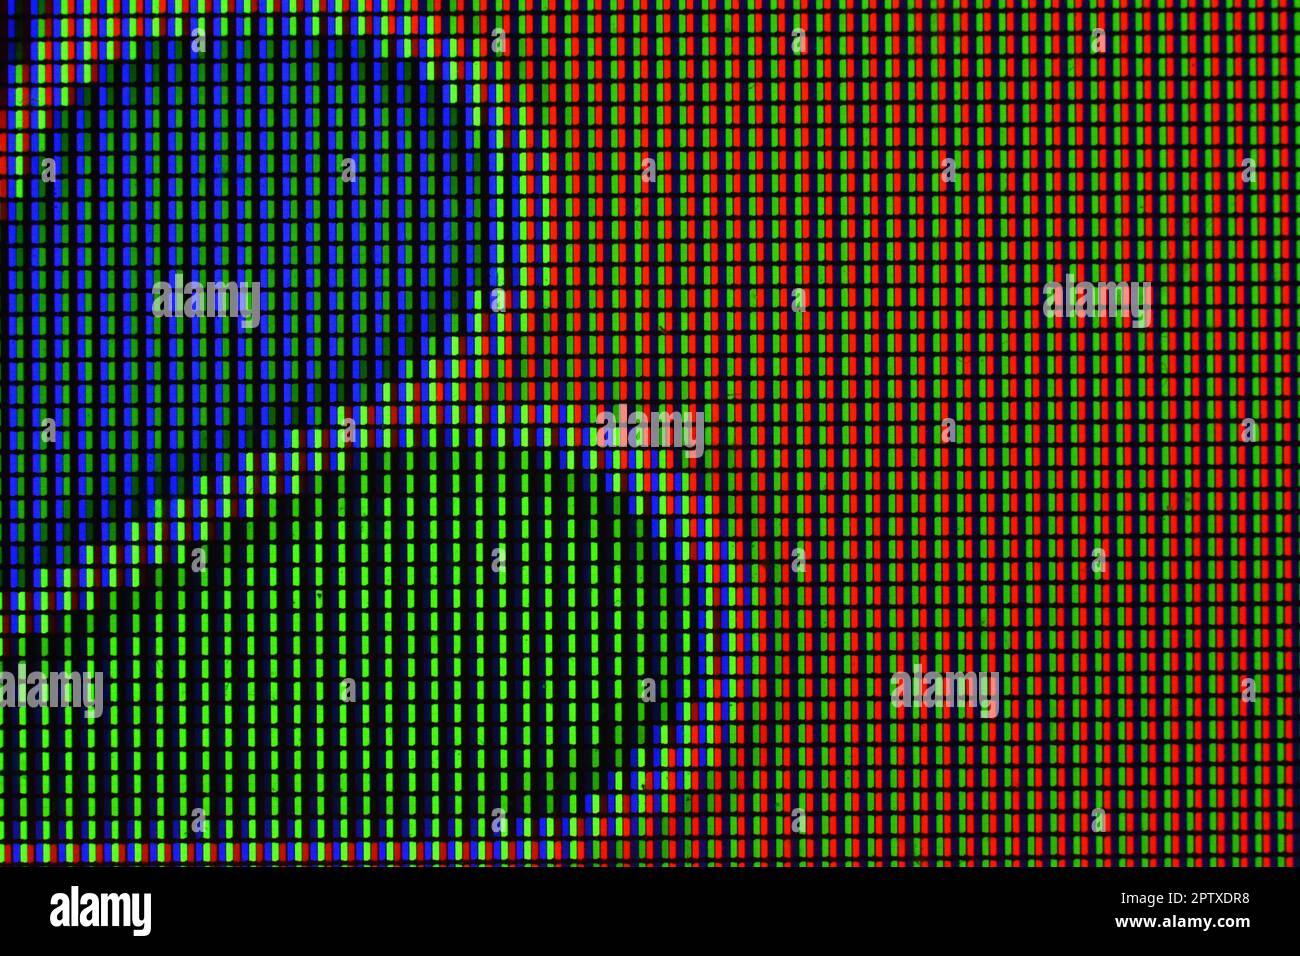 Close up view of magnified LED TV panel showing grid of tiny pixels with  different colors emission intensity Stock Photo - Alamy